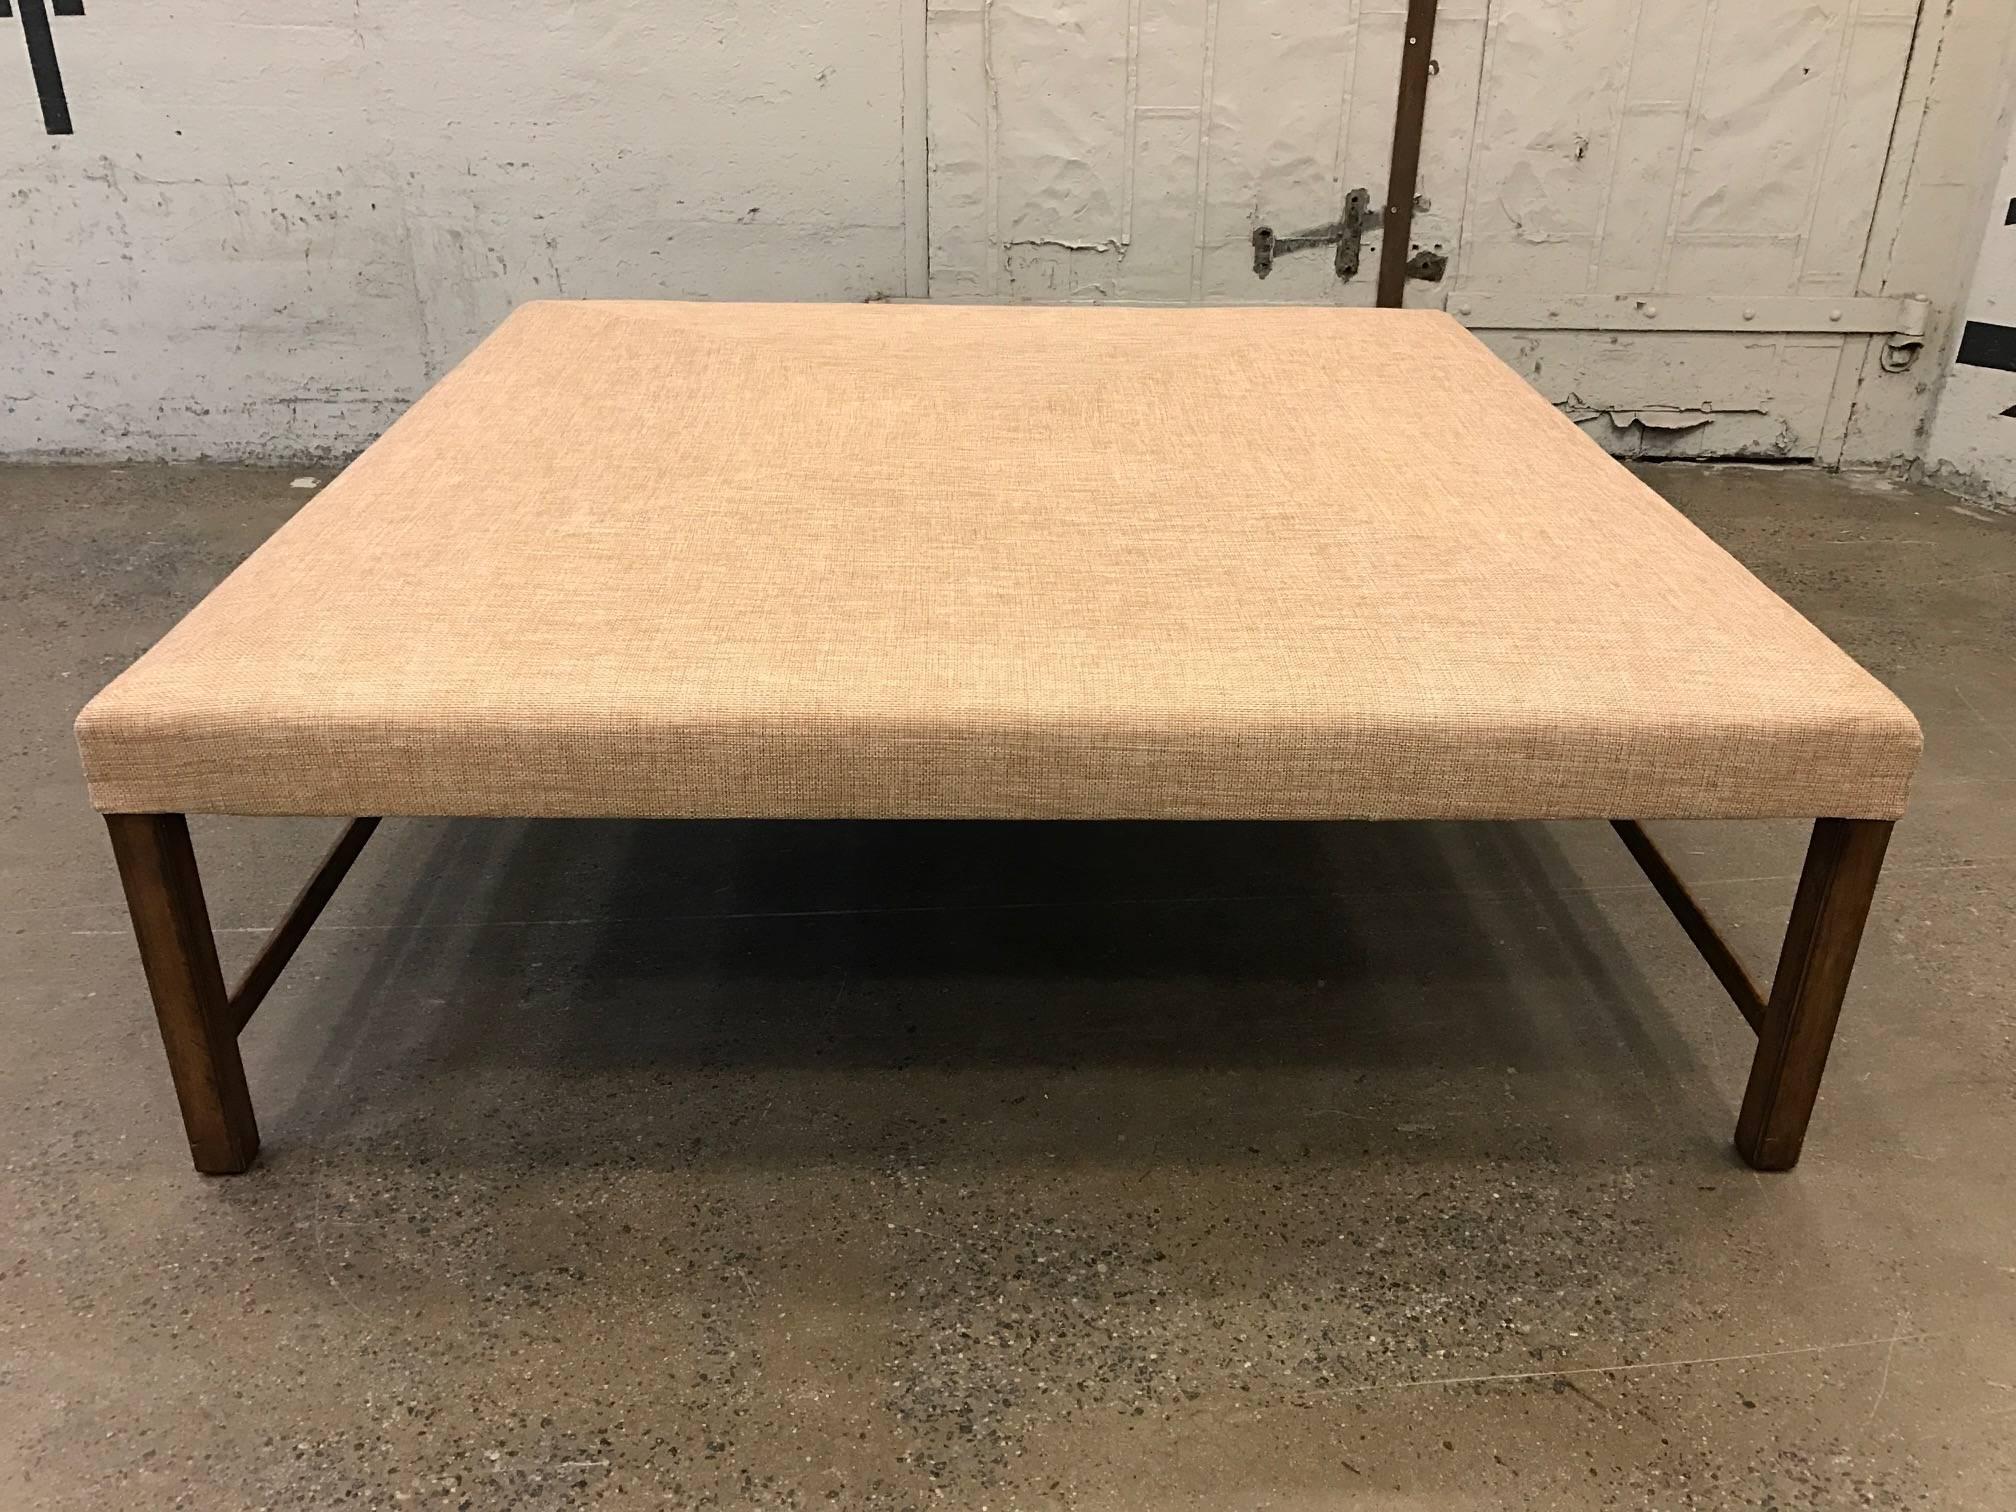 Can easily be used as a large bench or add a glass top to make a coffee table. Has walnut base. Newly upholstered in linen blend fabric.